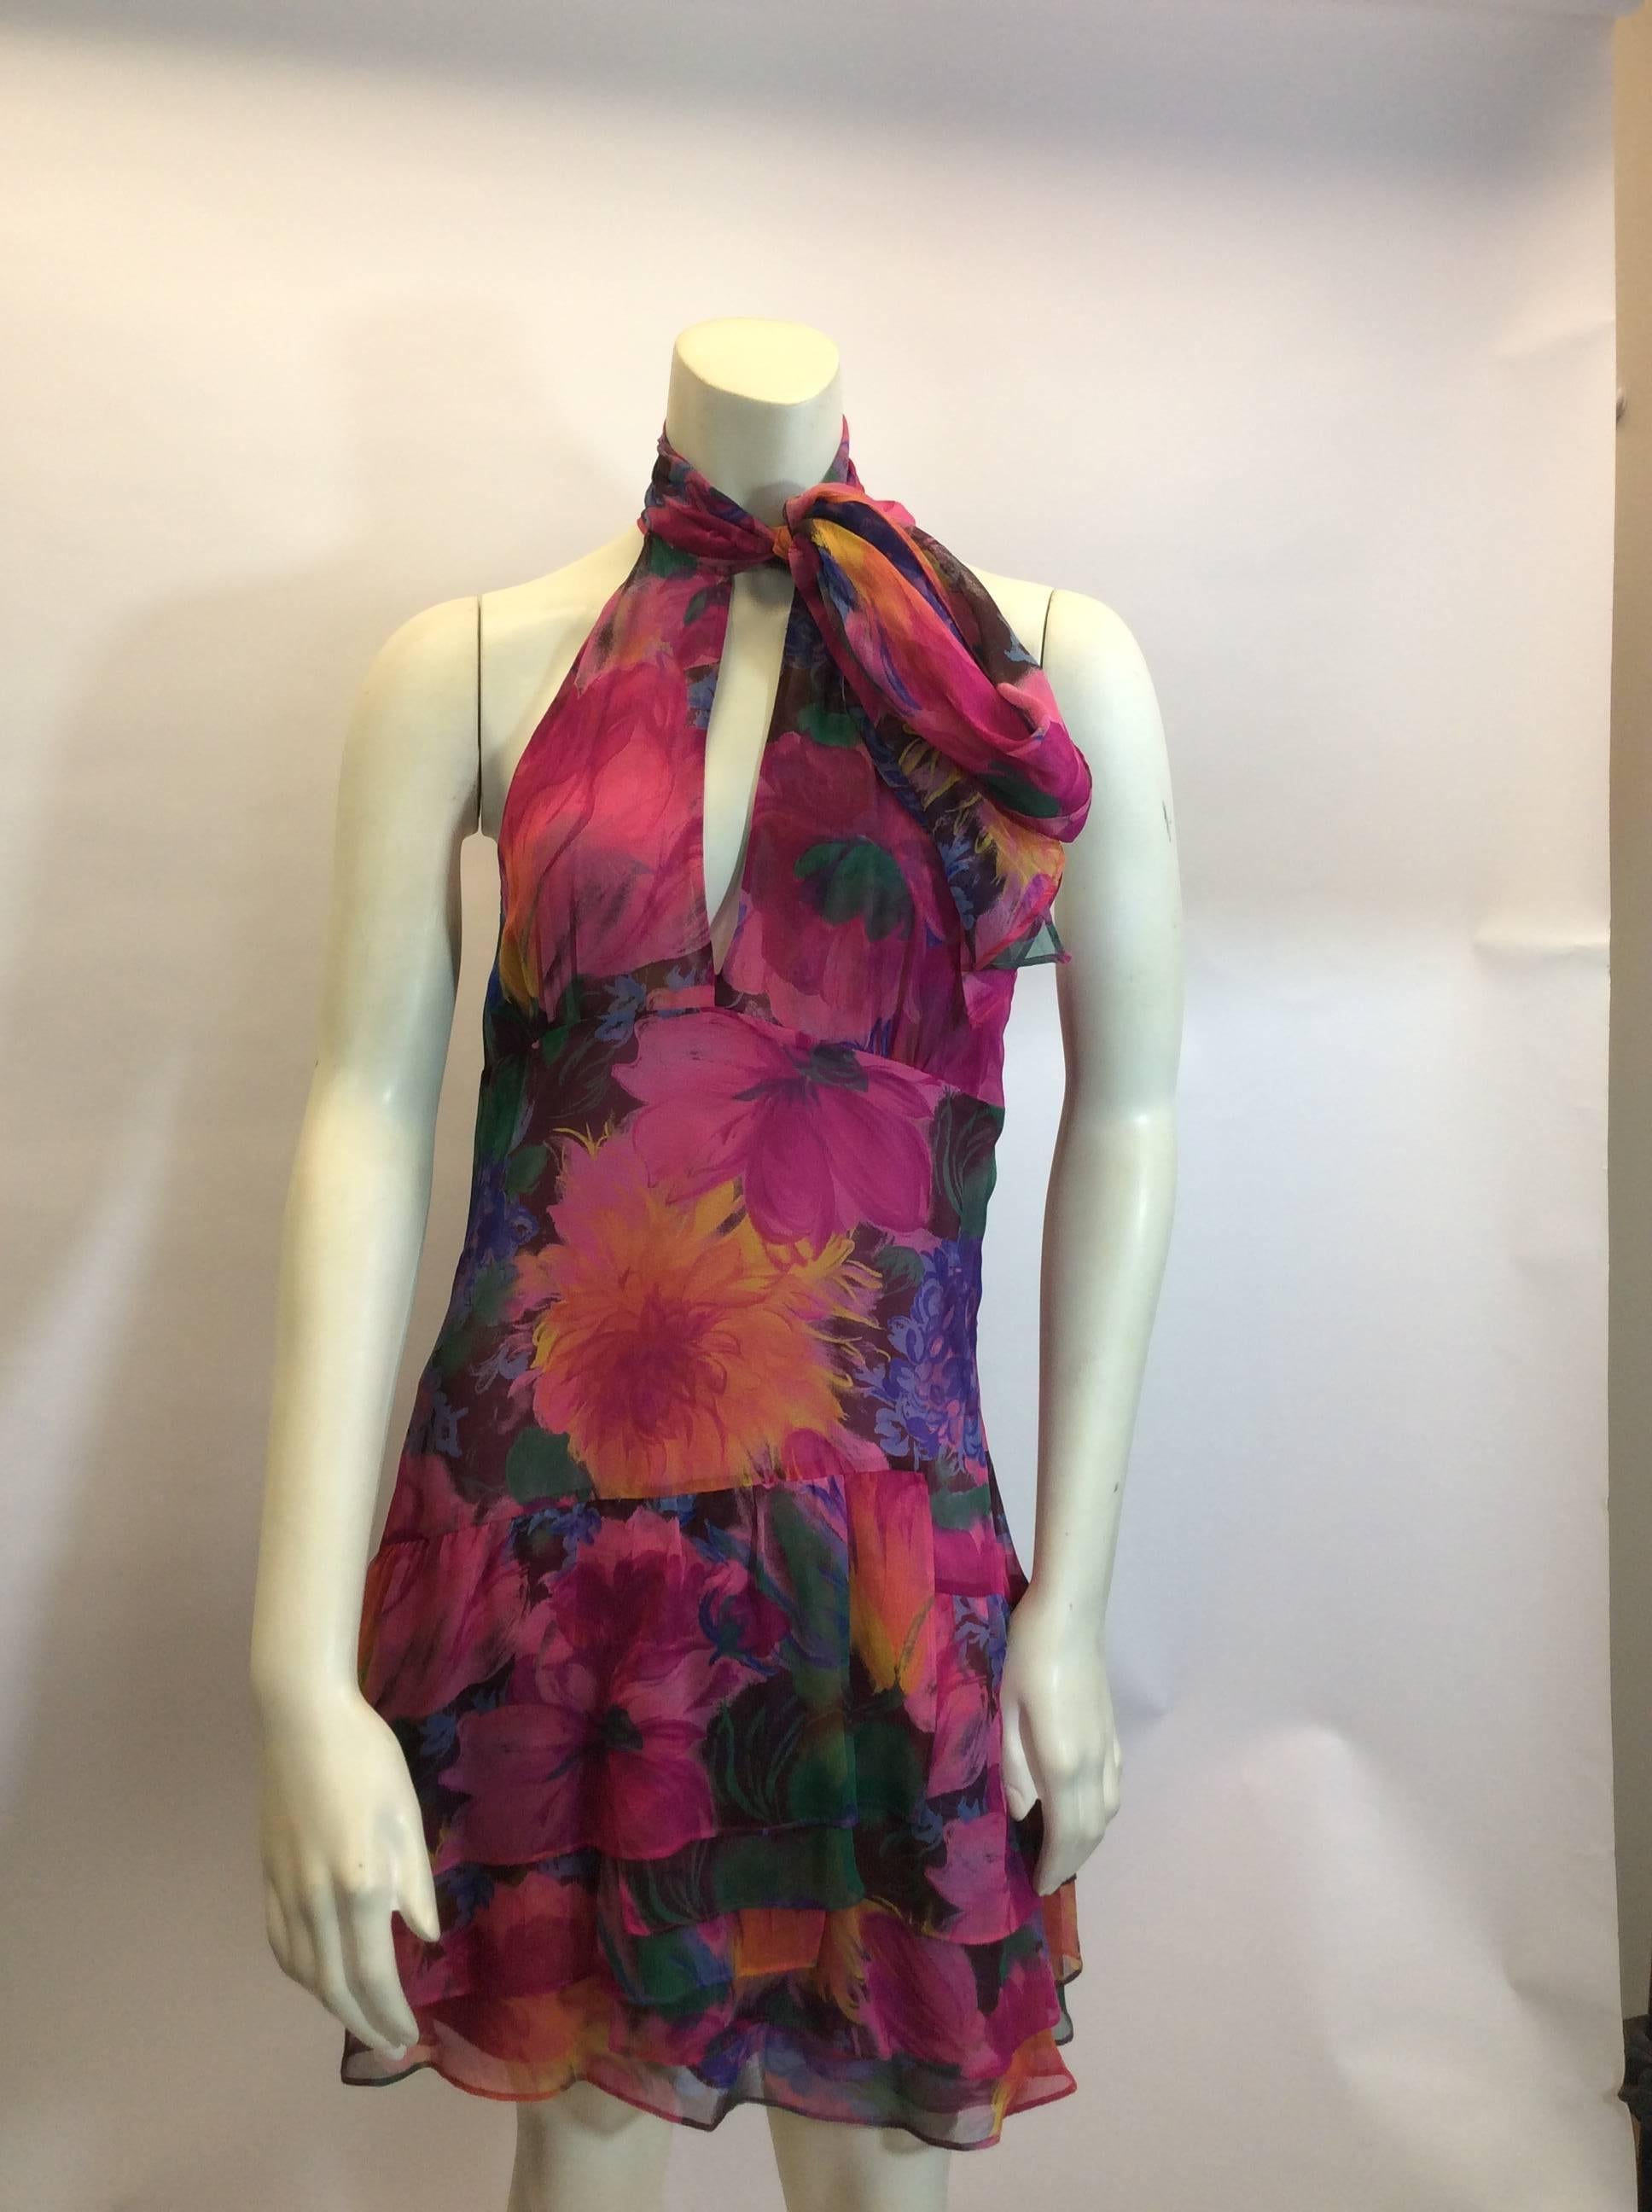 Dolce & Gabbana Floral Silk Dress
100% silk
Lined 
Size 42
Made in Italy
$250
